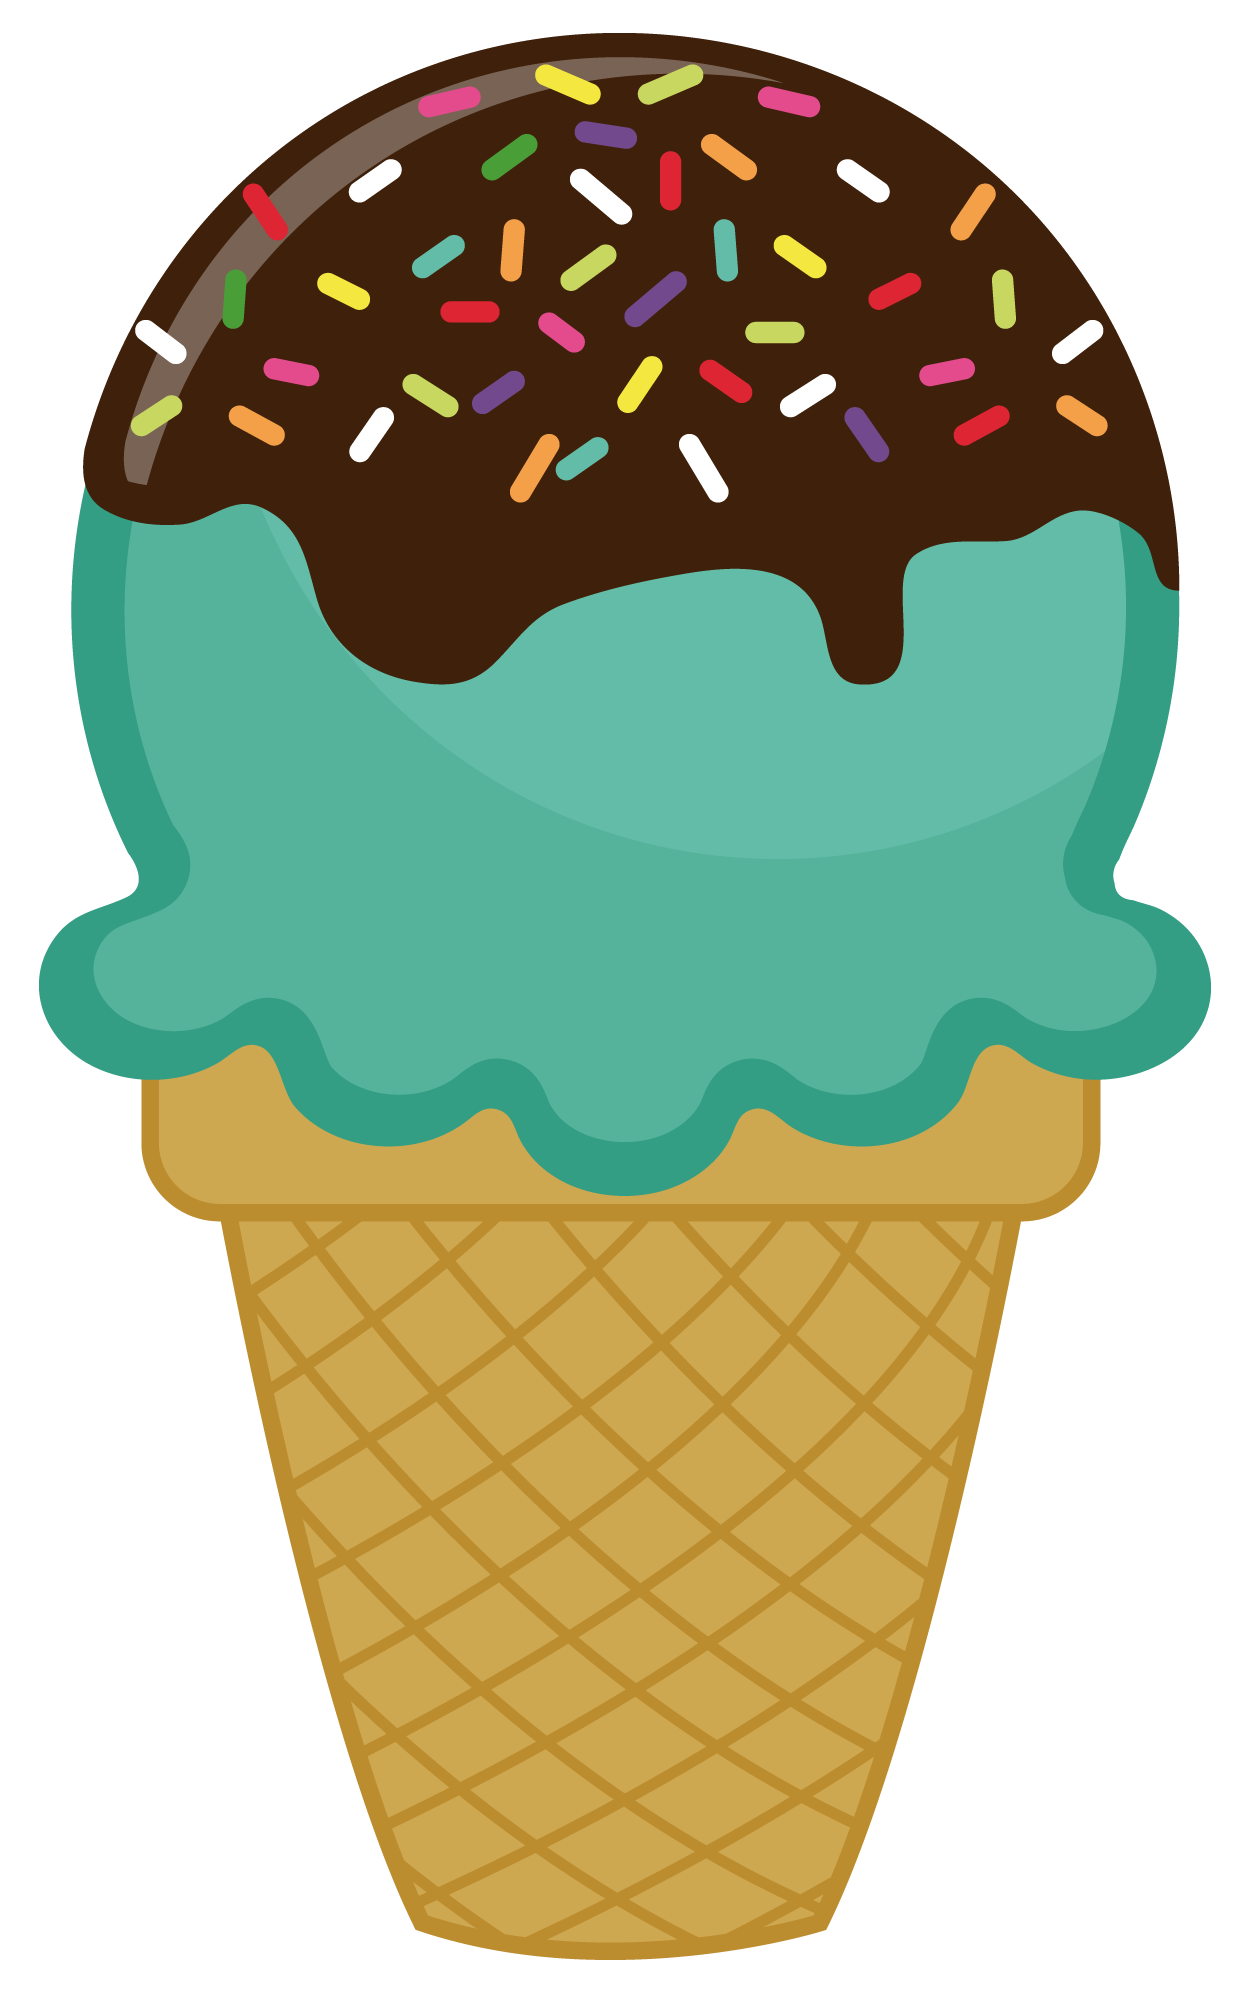 Icecream Clipart Printable Icecream Printable Transparent Free For Download On Webstockreview 21